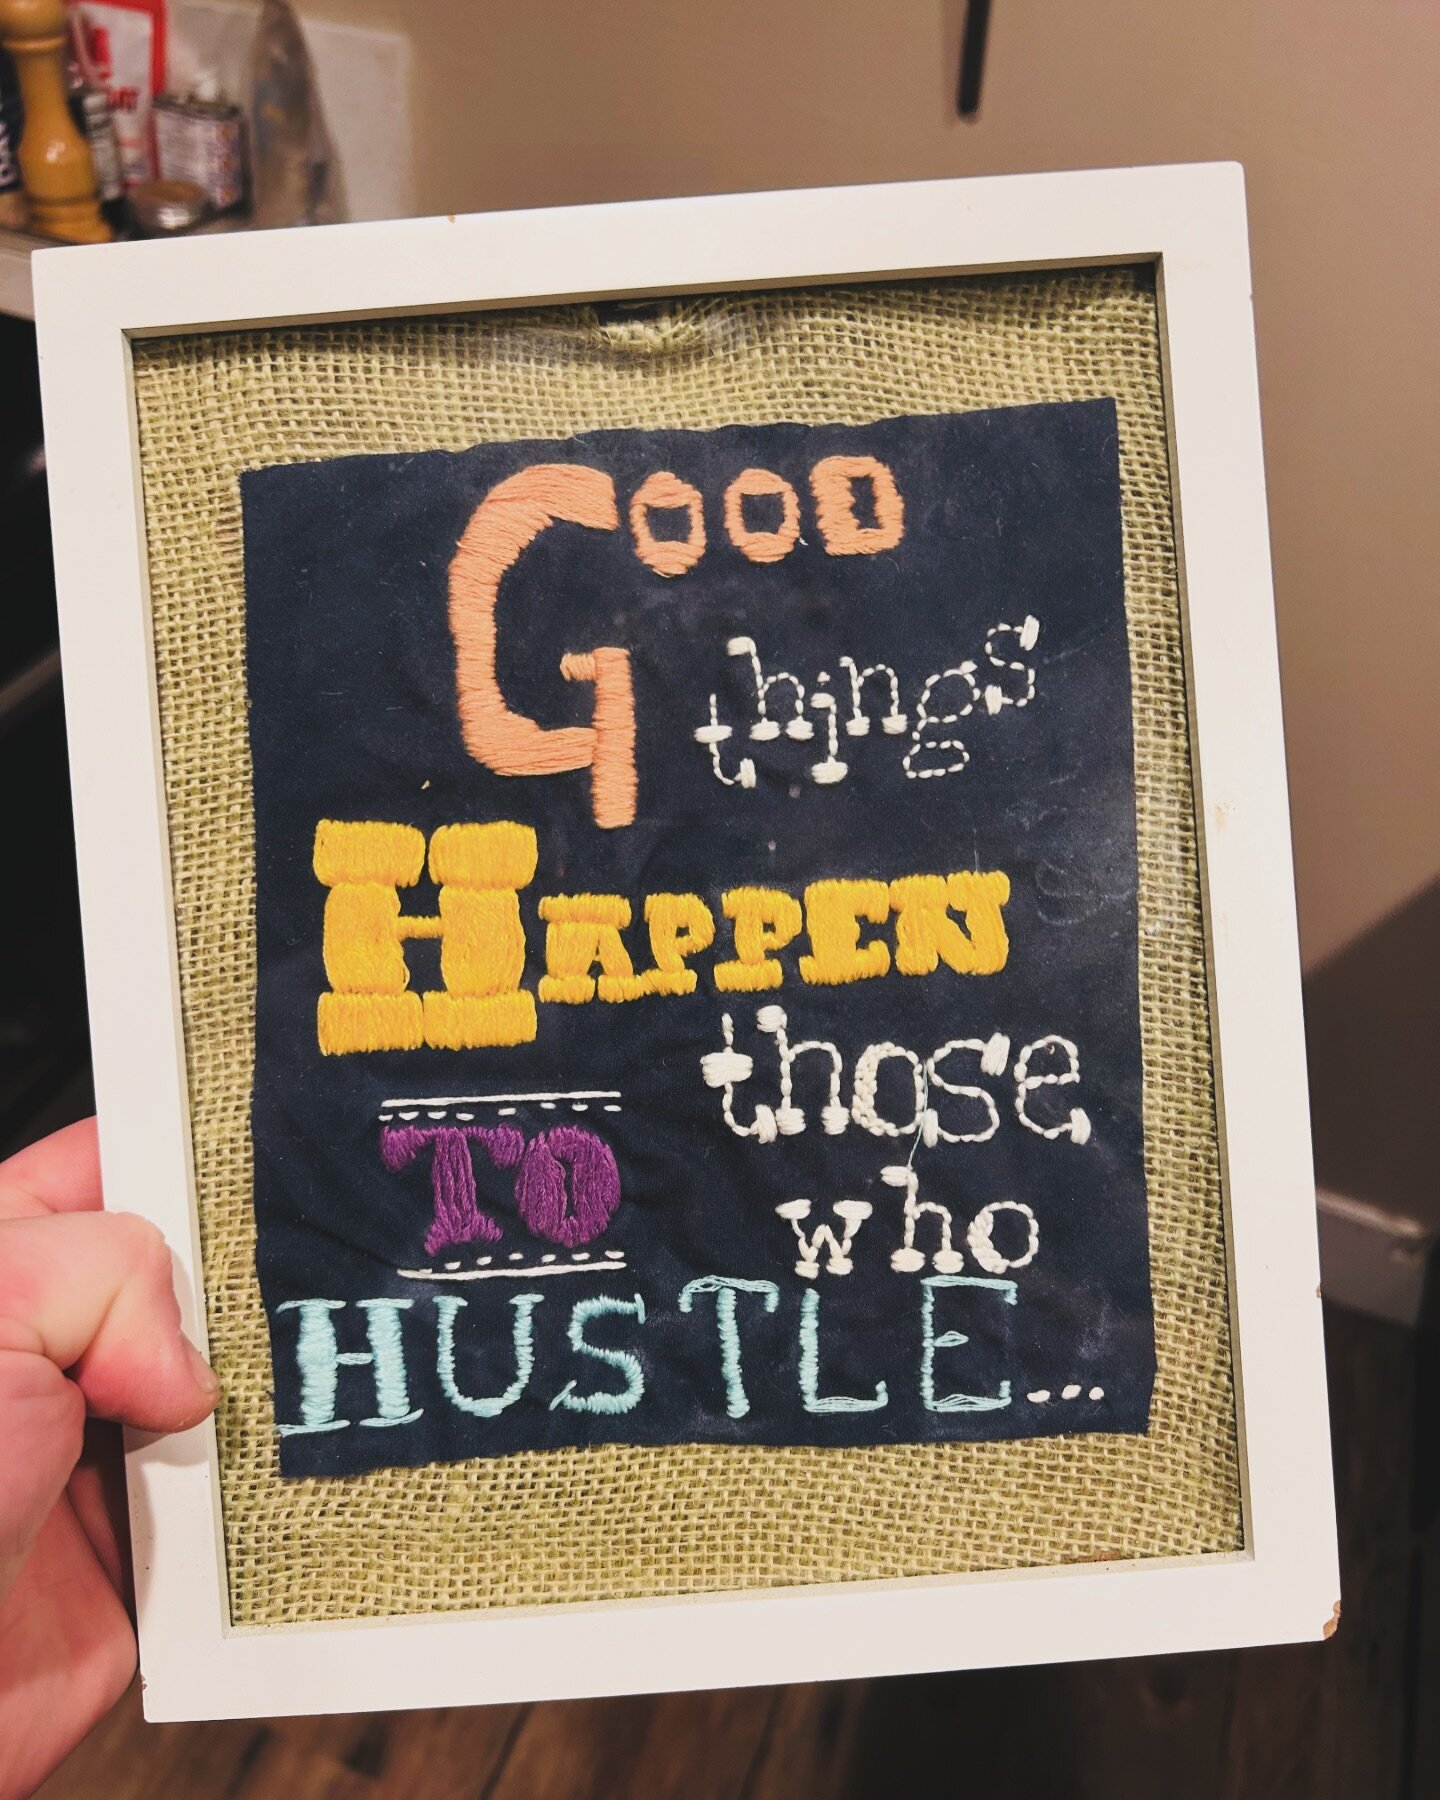 My sister made this for me about ten years ago when I was deep in the weeds at a job on Nantucket, working 90 hour work weeks. 

I&rsquo;d say while some days don&rsquo;t feel good, it&rsquo;s all gonna work out in the end.  I hope. 

#hustle #workha